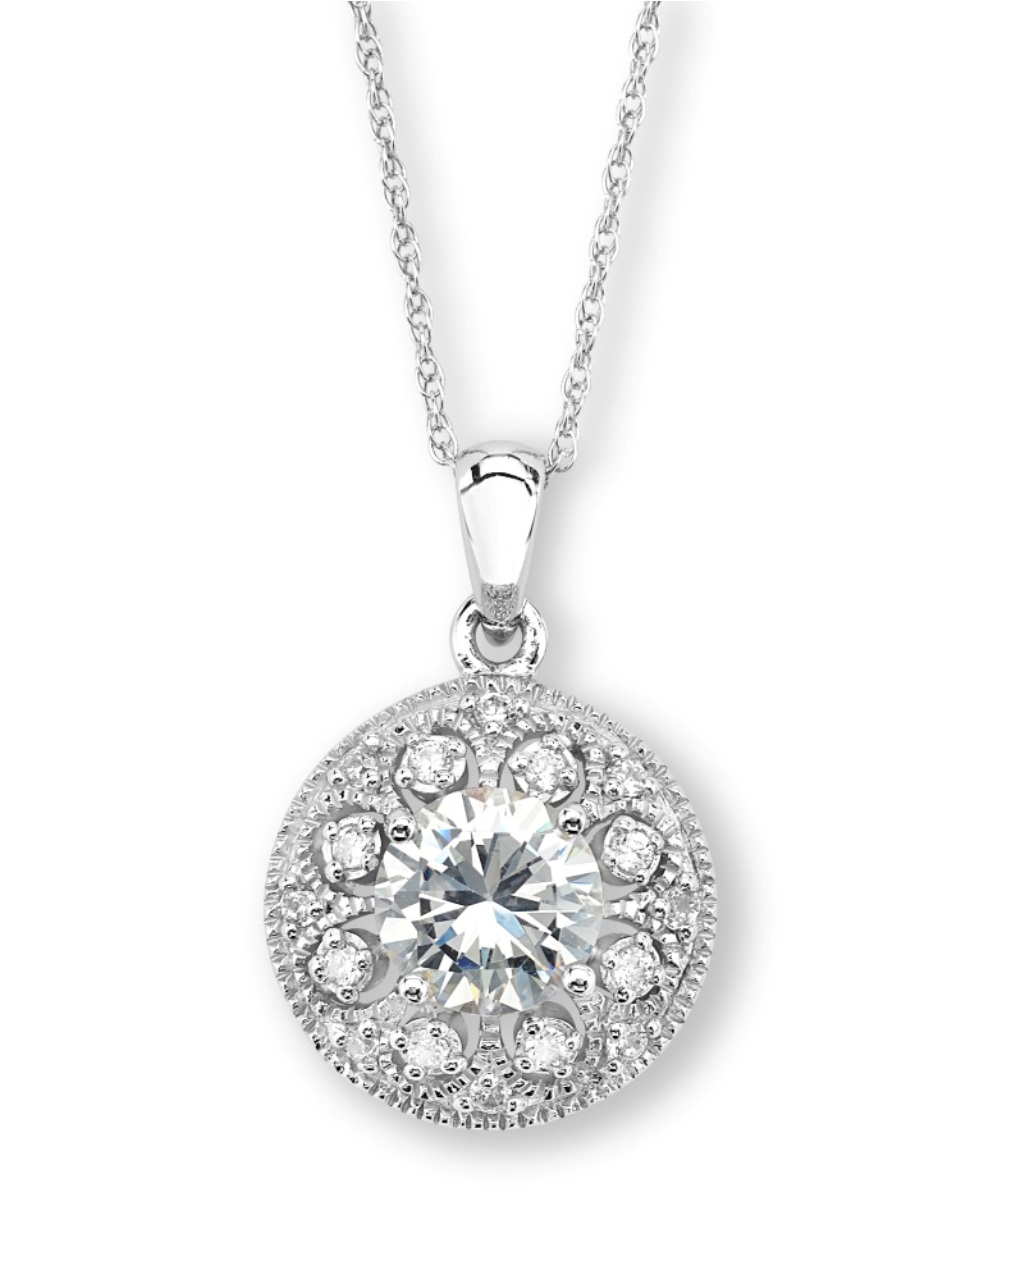 Round CZ  Pendant Necklace, Rhodium Plated Sterling Silver, 18